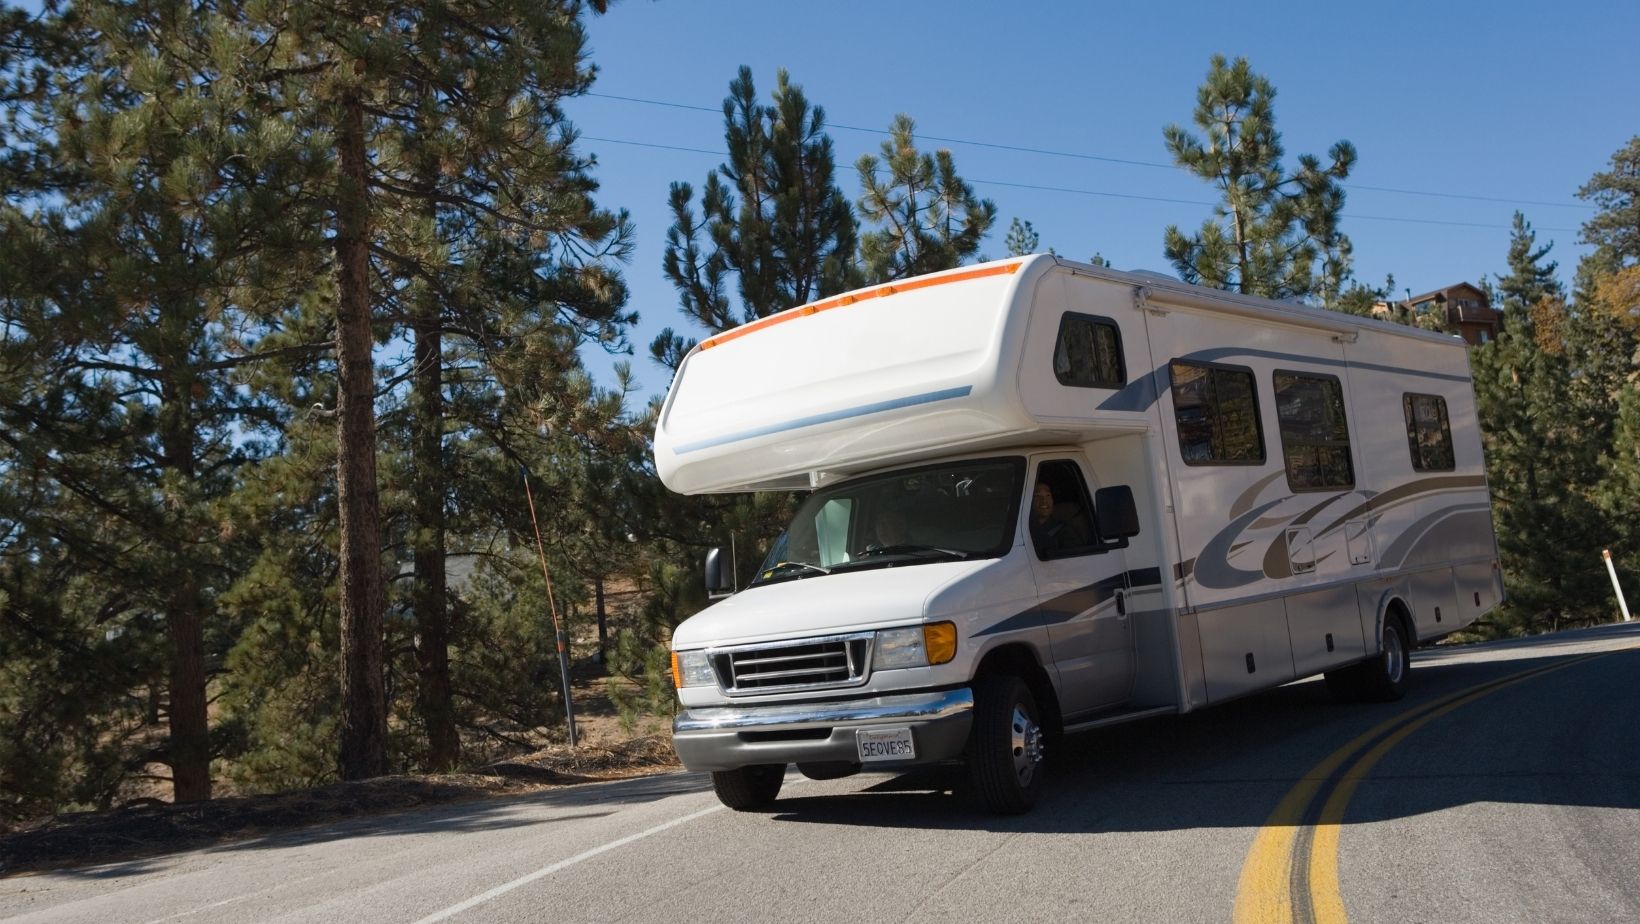 7 Best Rv Campgrounds In Northern